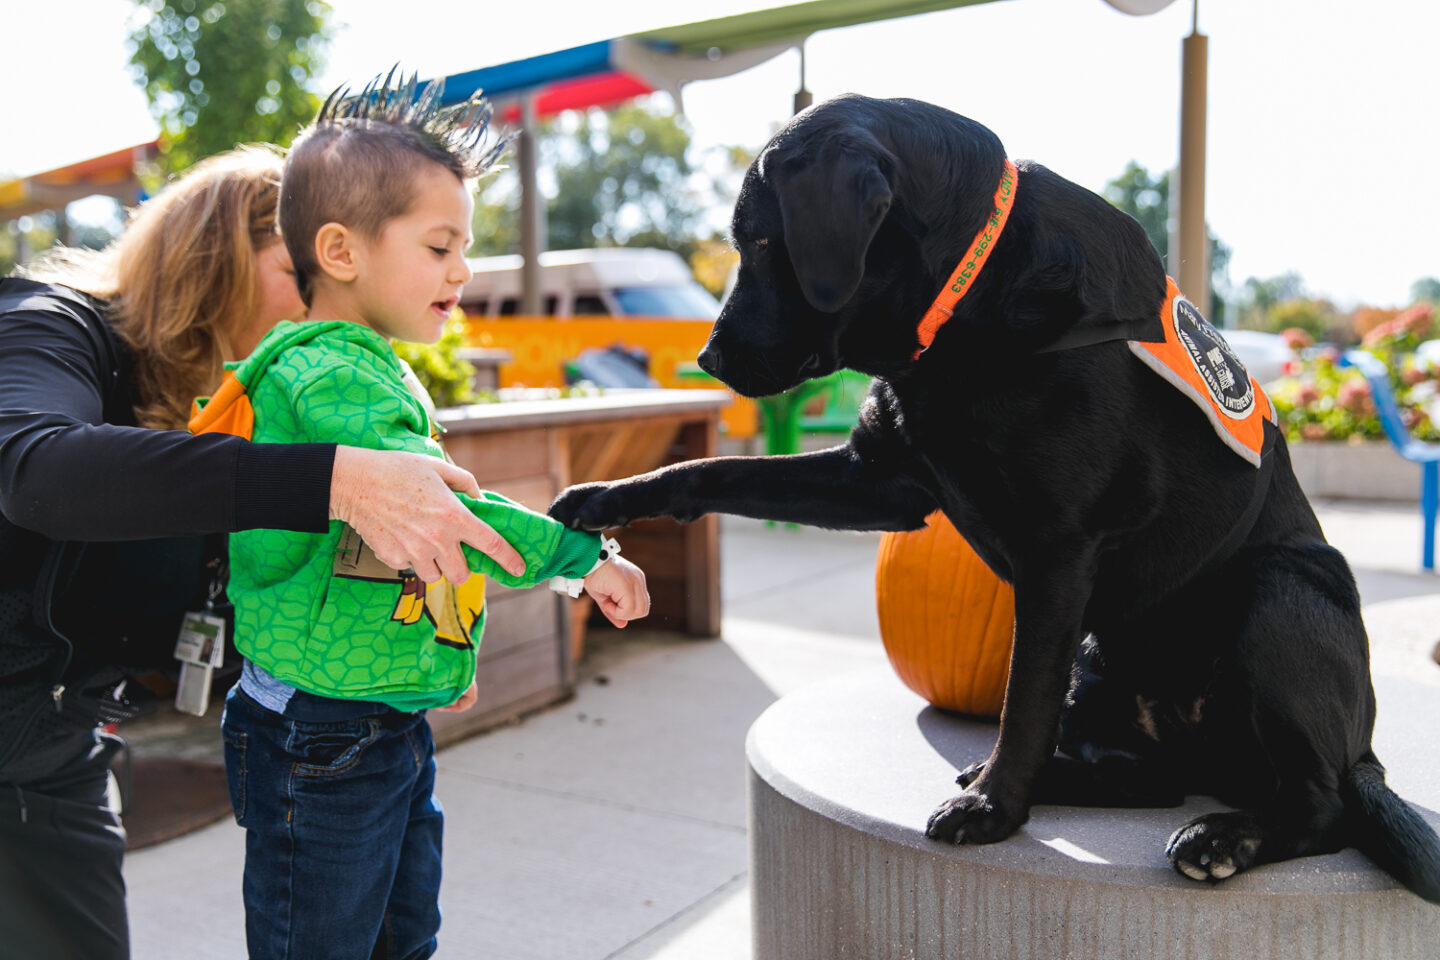 A young boy interacts with a therapy dog during an animal-assisted therapy session in the outdoor garden.